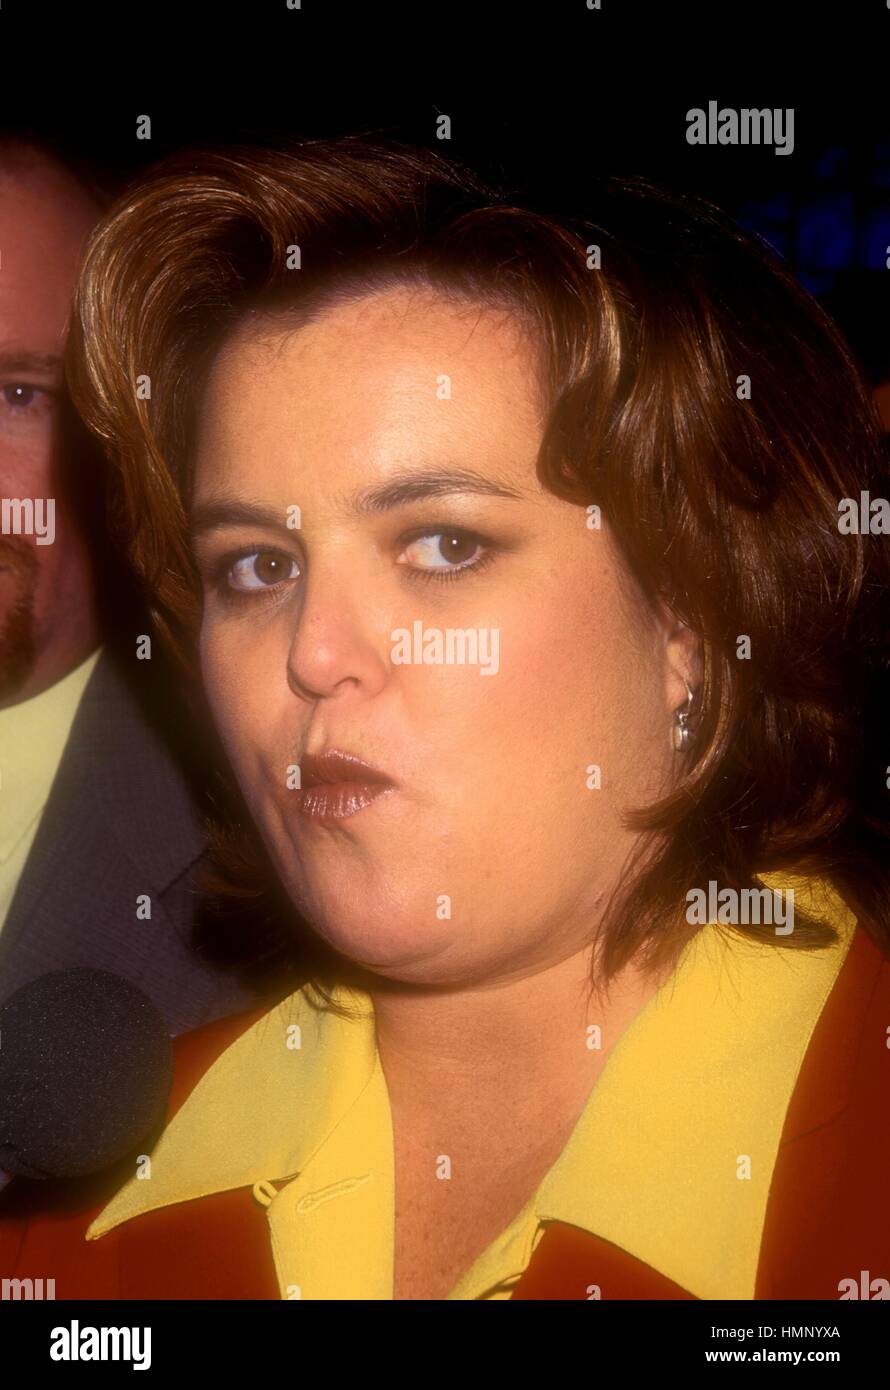 ROSIE O' DONNELL JAN. 1997 N.A.T.P.E. TV CONVENTION NEW ORLEANS KREDIT ALLE VERWENDET Stockfoto